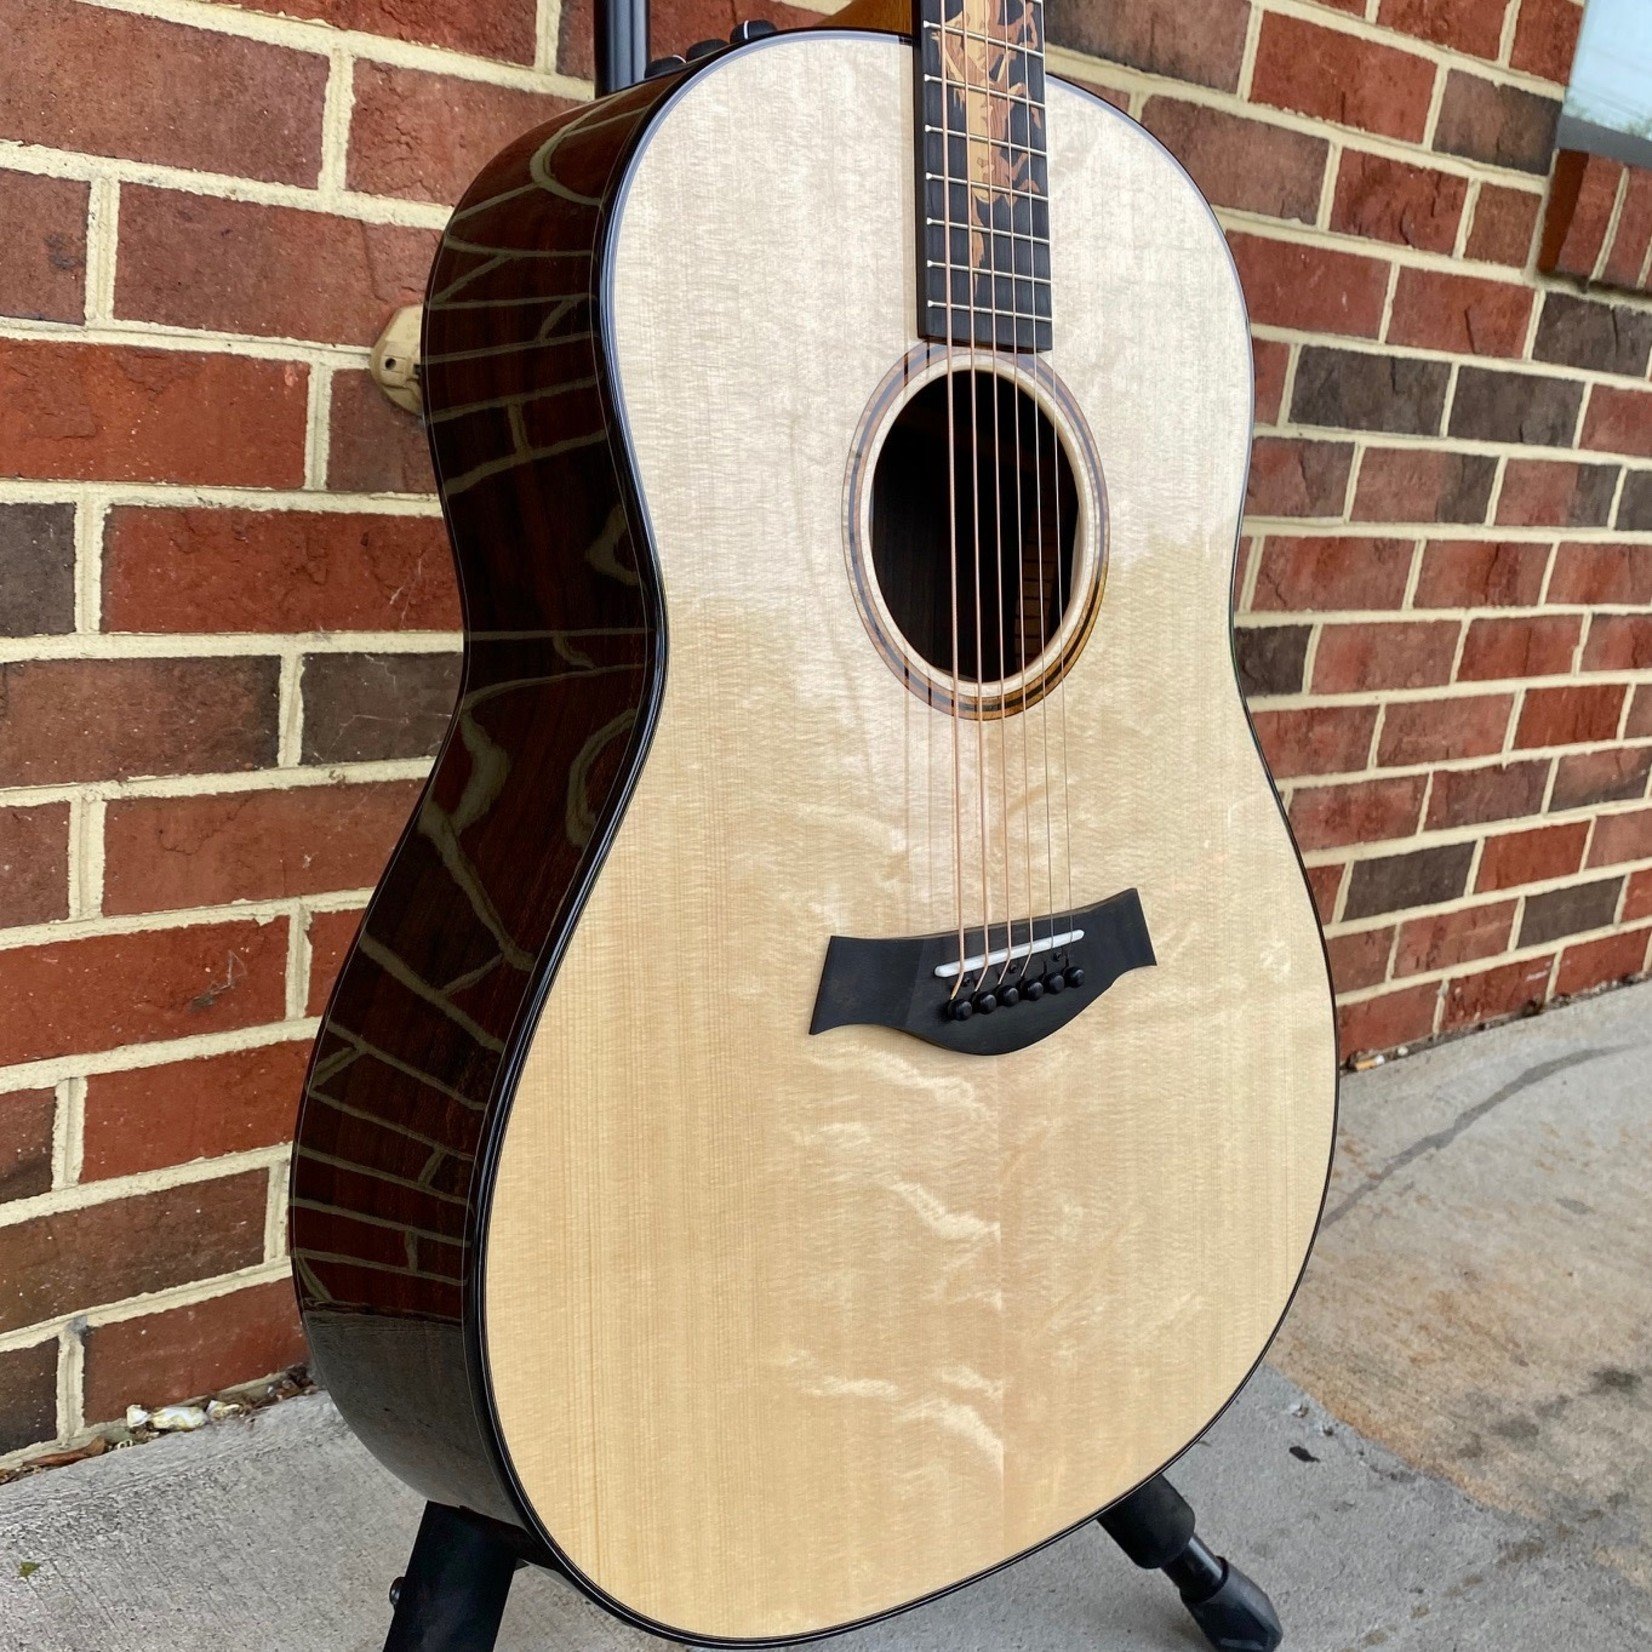 Taylor Taylor Catch Custom #34, Grand Pacific, Ziricote Back and Sides, Bearclaw Lutz Spruce Top, Running Horses Inlay, Engraved Tuners, ES2 Electronics, Western Paisley Case